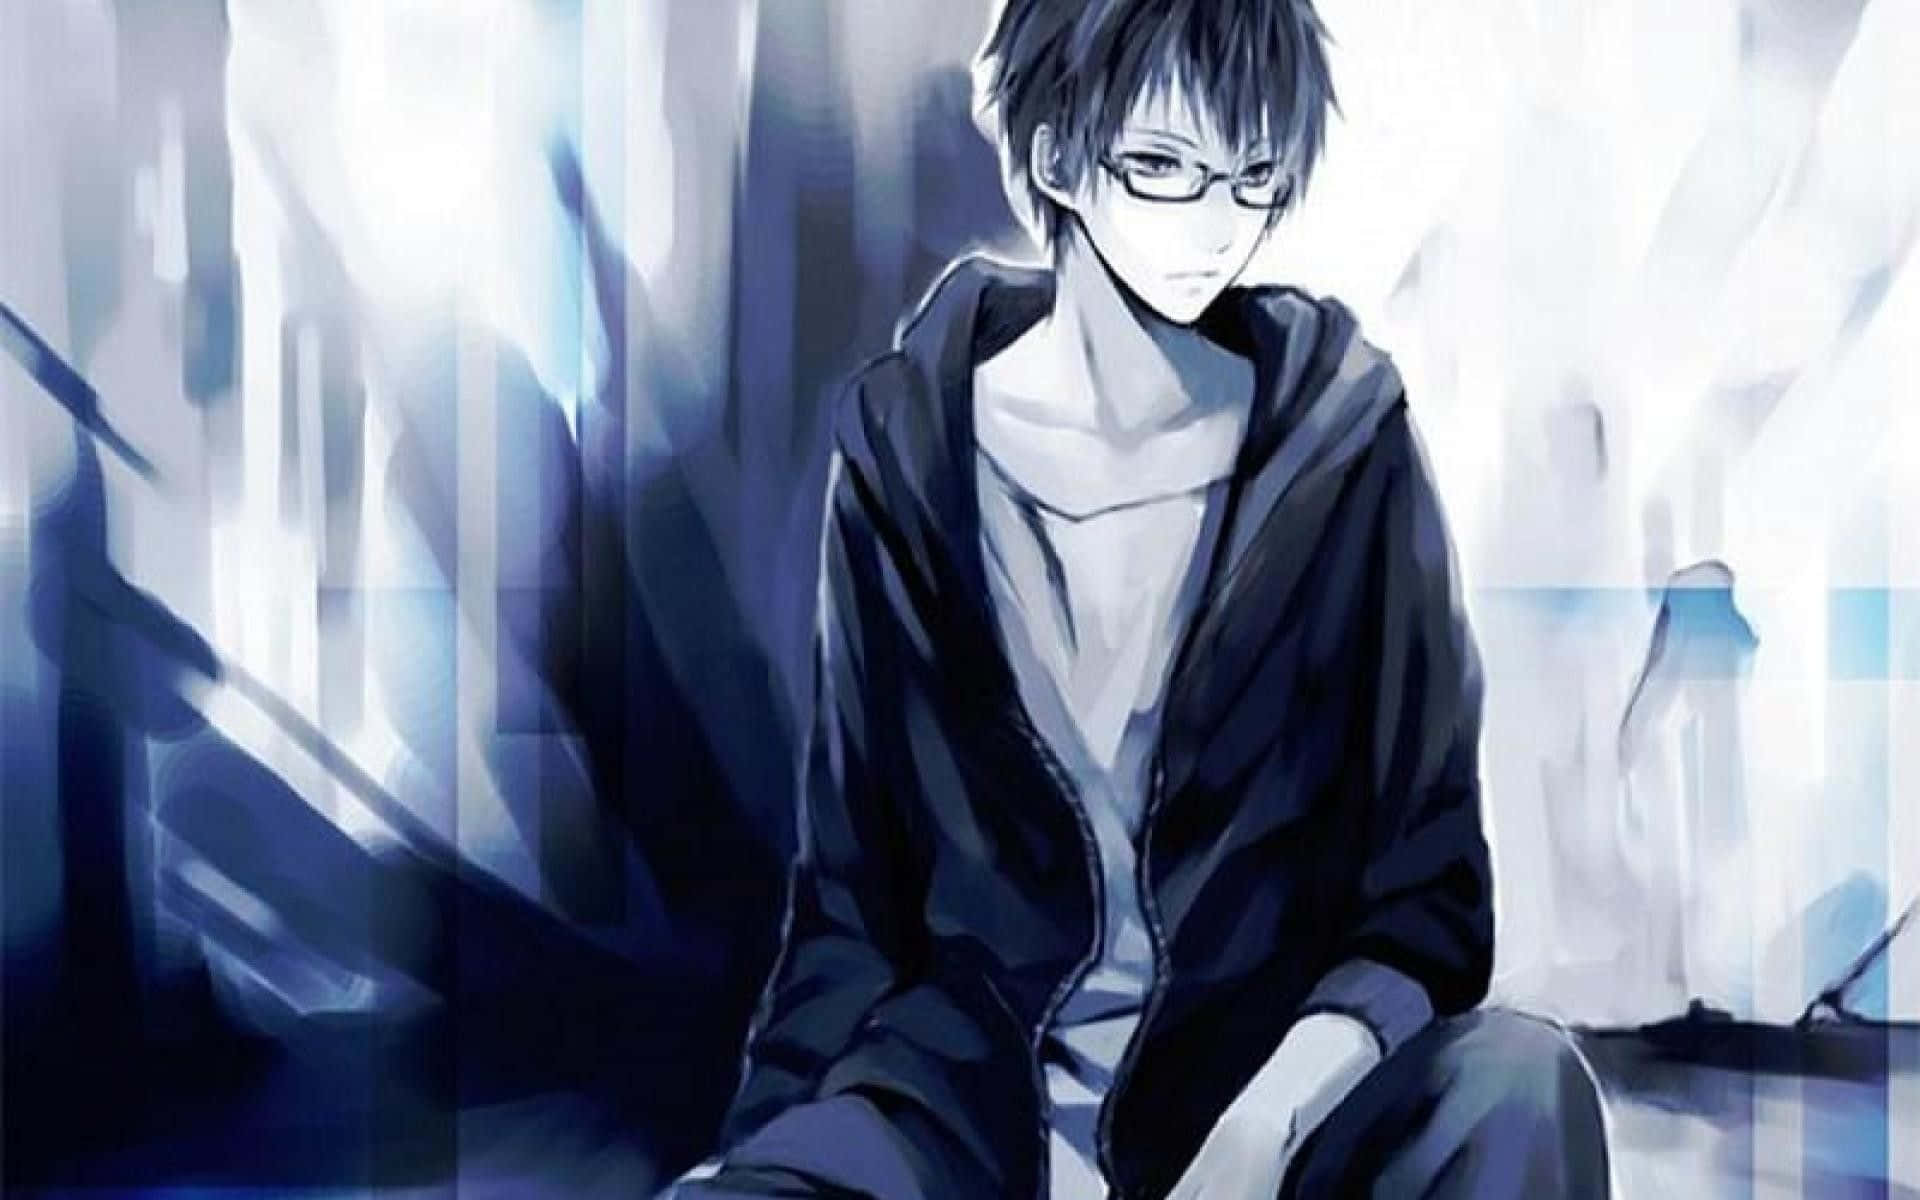 Anime Blue Boy With Glasses Wallpaper